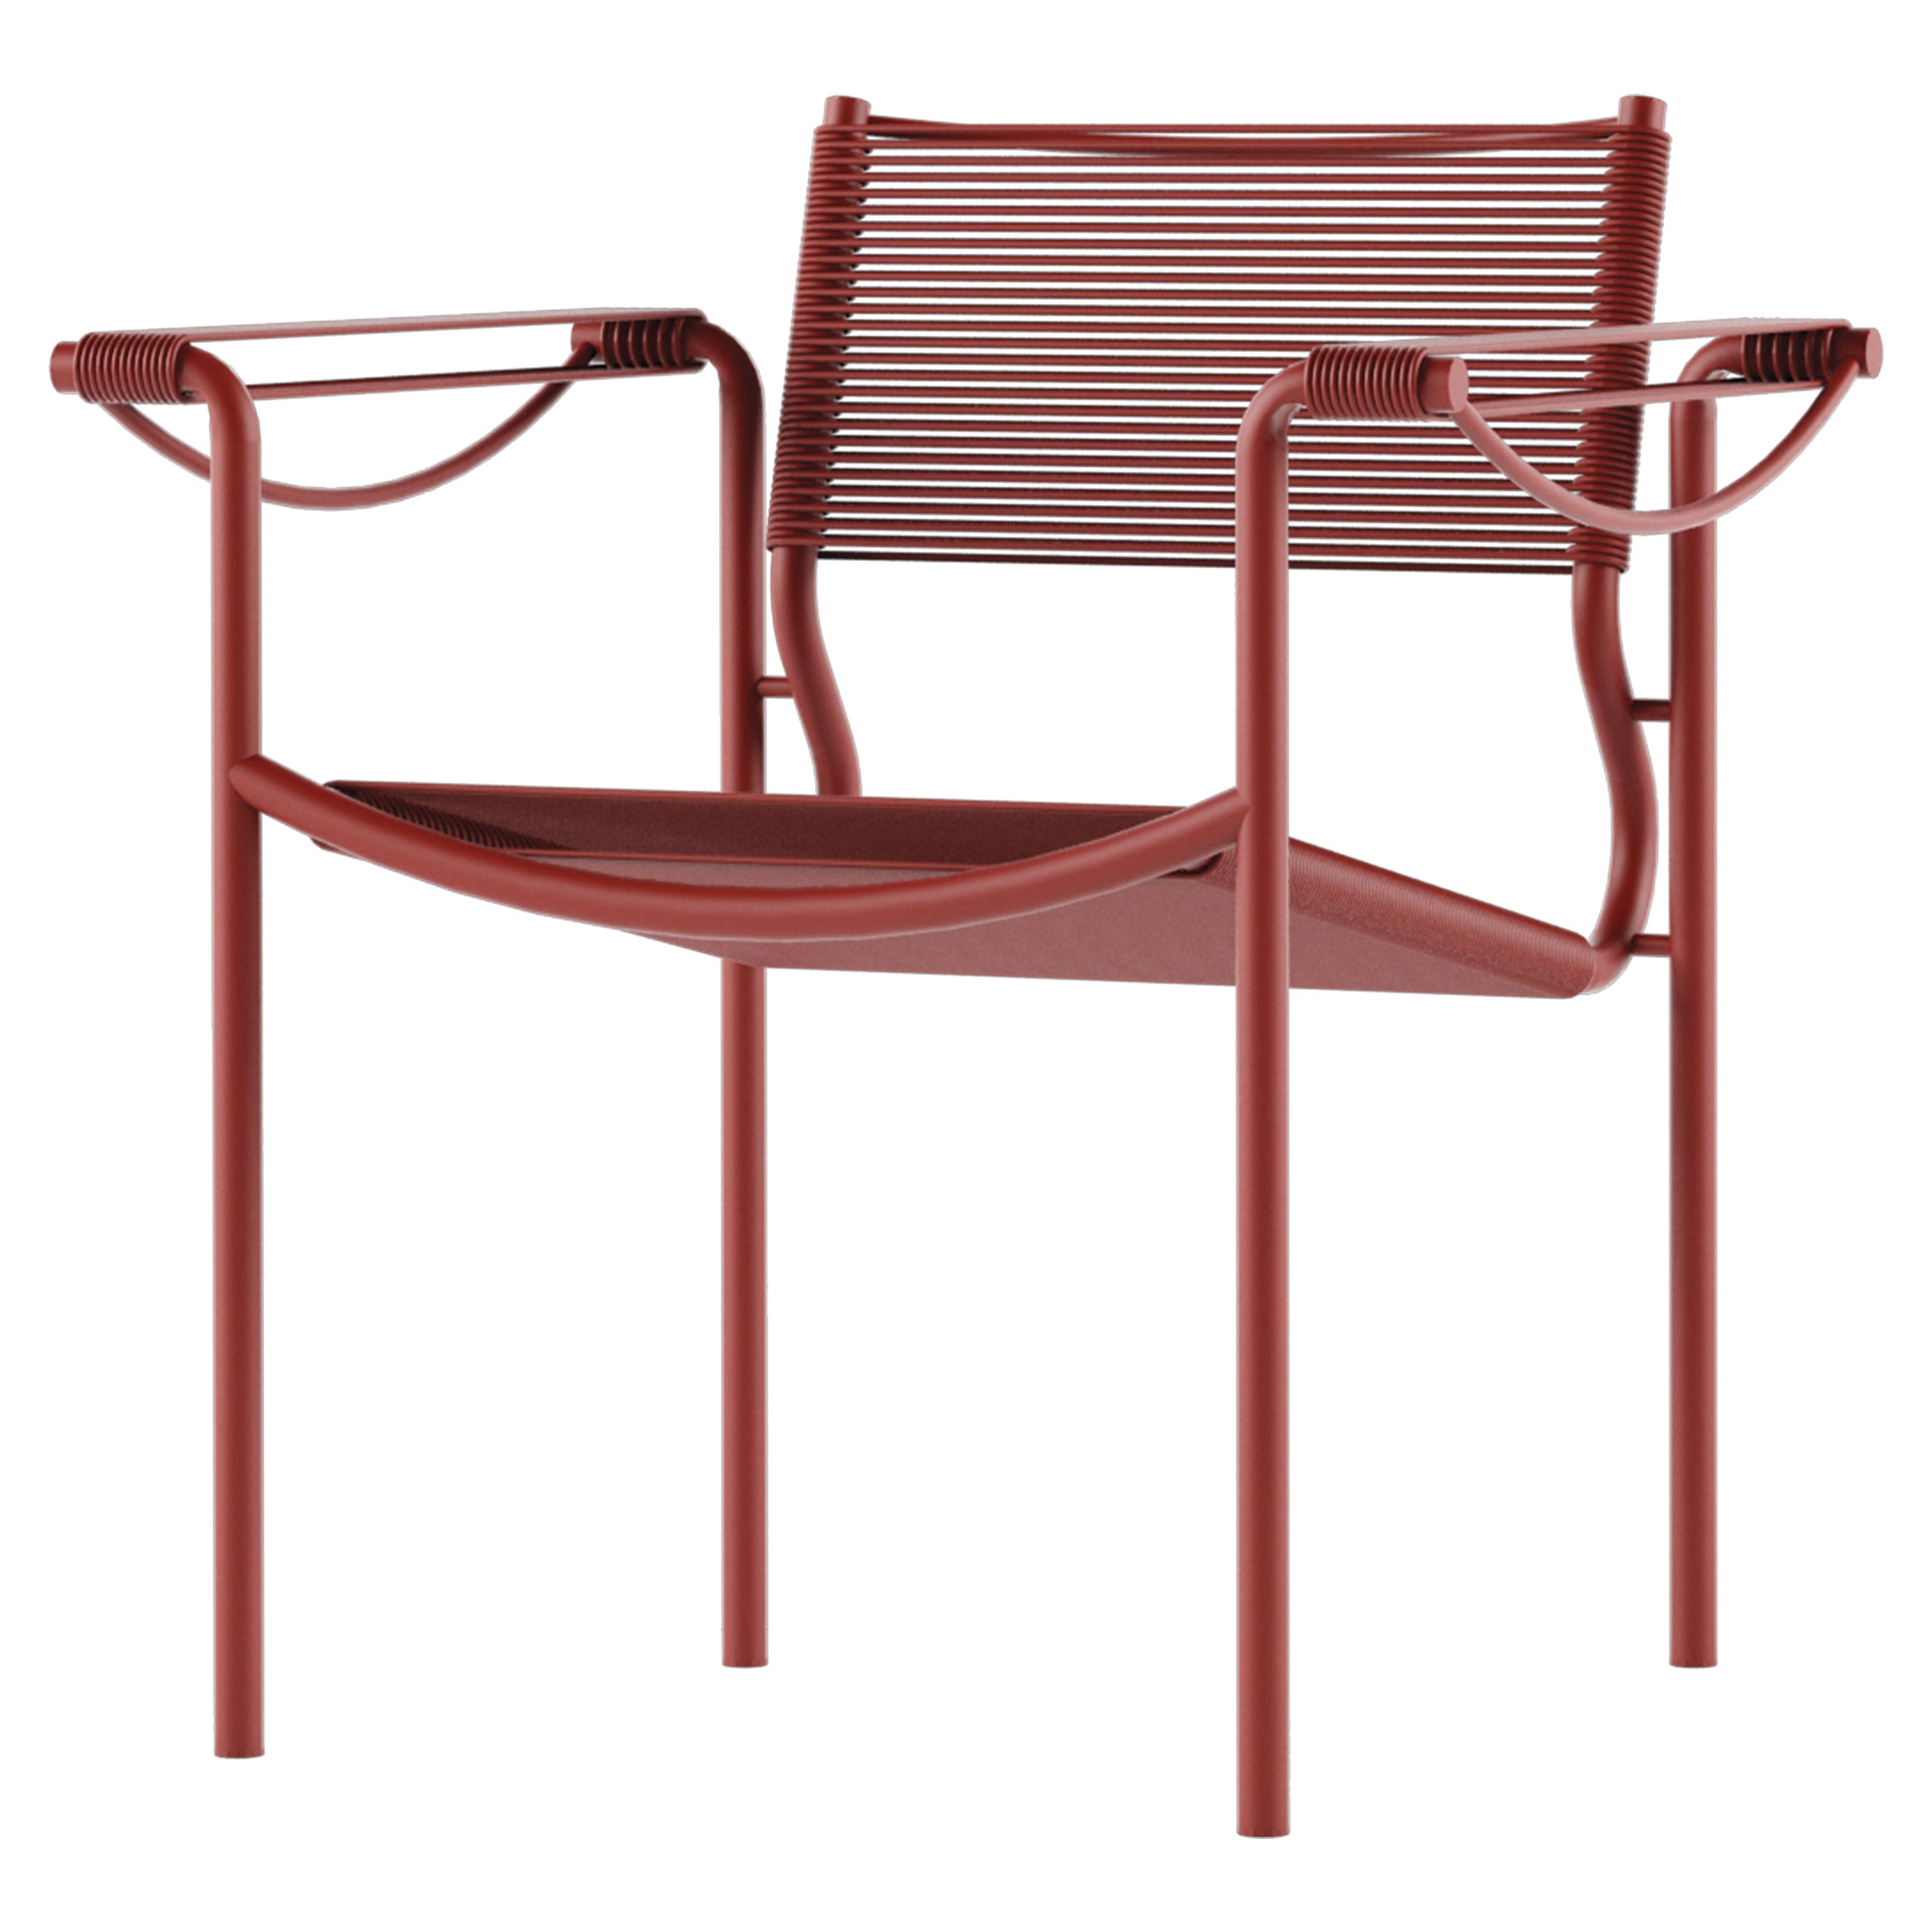 Alias 109 Spaghetti Armchair with Red PVC Seat and Red Lacquered Steel Frame